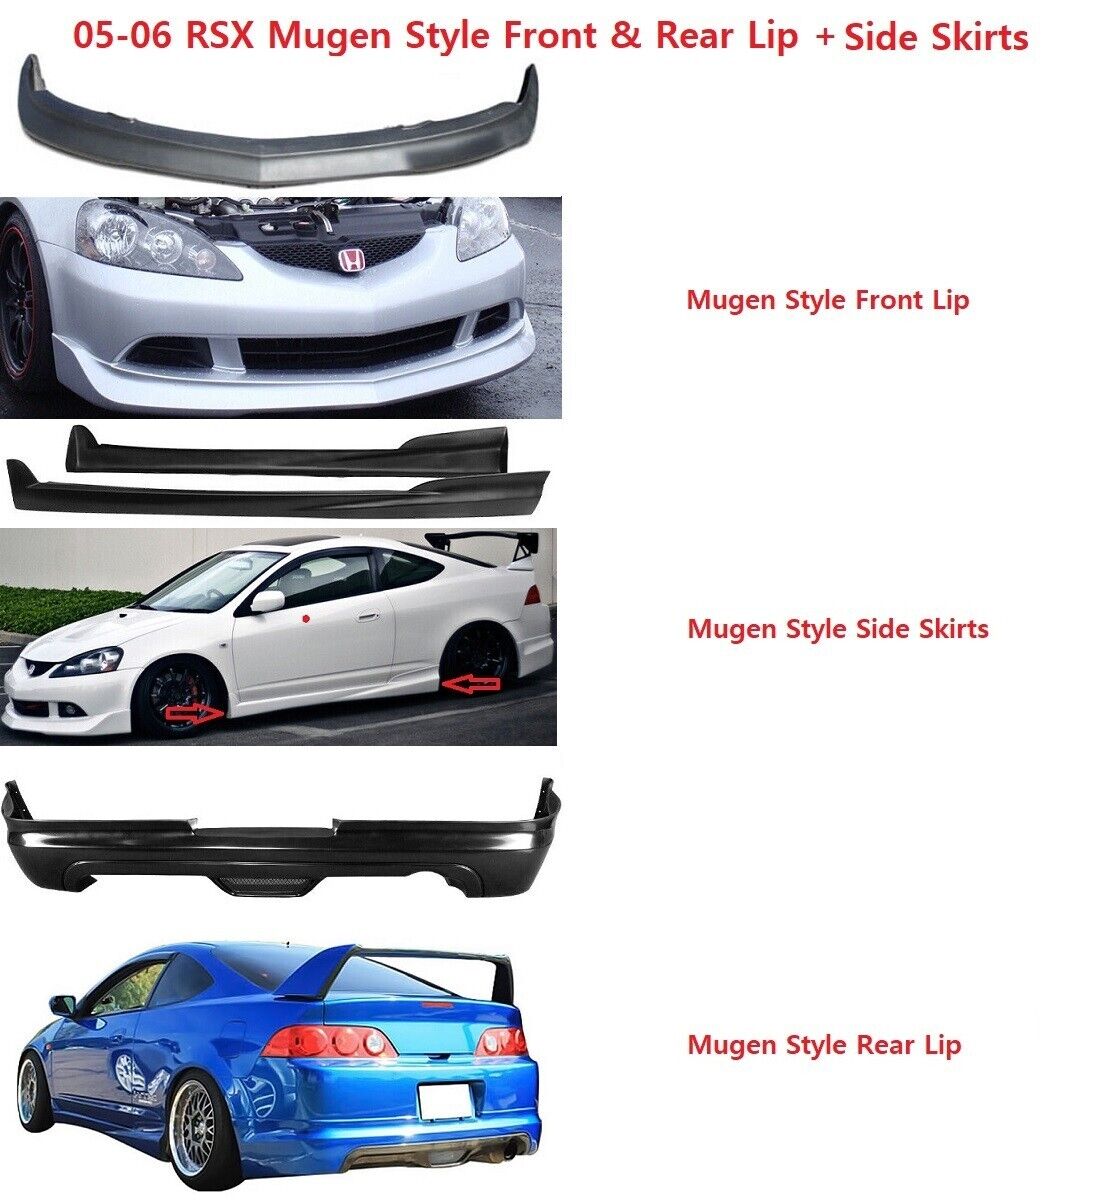 For 05-06 Acura RSX Mugen Style Front + Rear Bumper Lip + Side Skirt PU Black